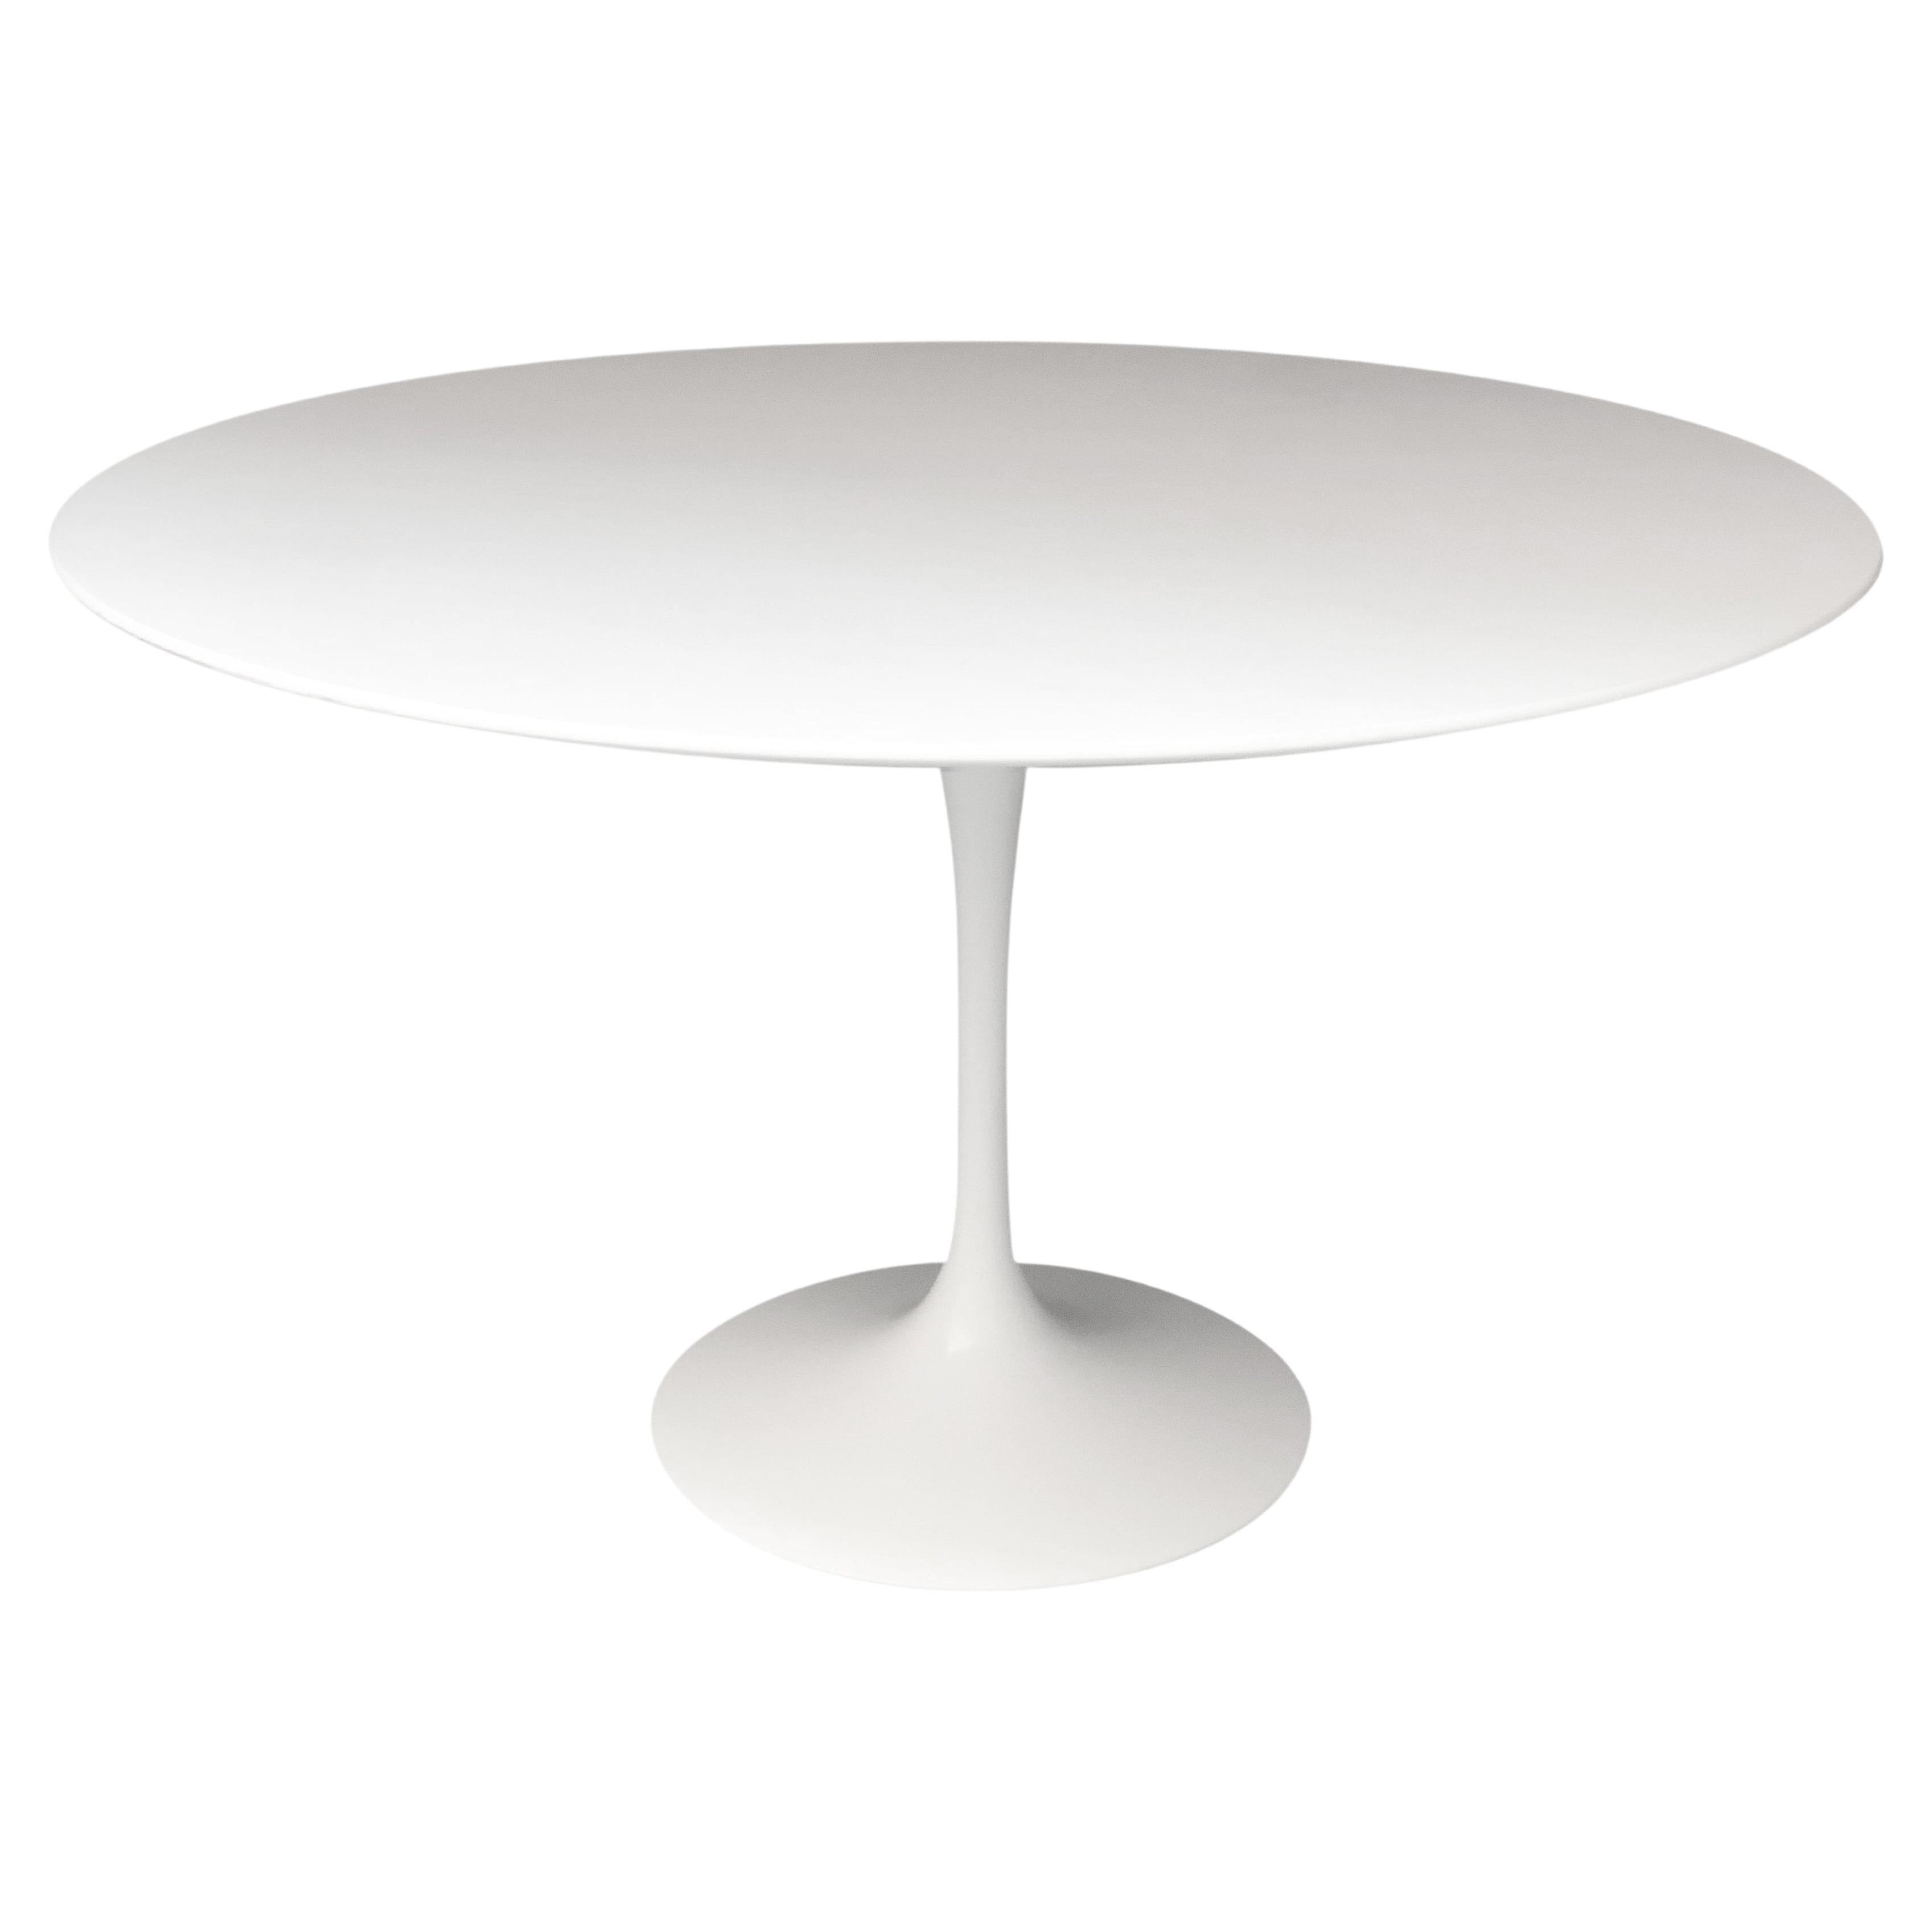 Round White Pedestal 'Tulip' Table by Eero Saarinen for Knoll